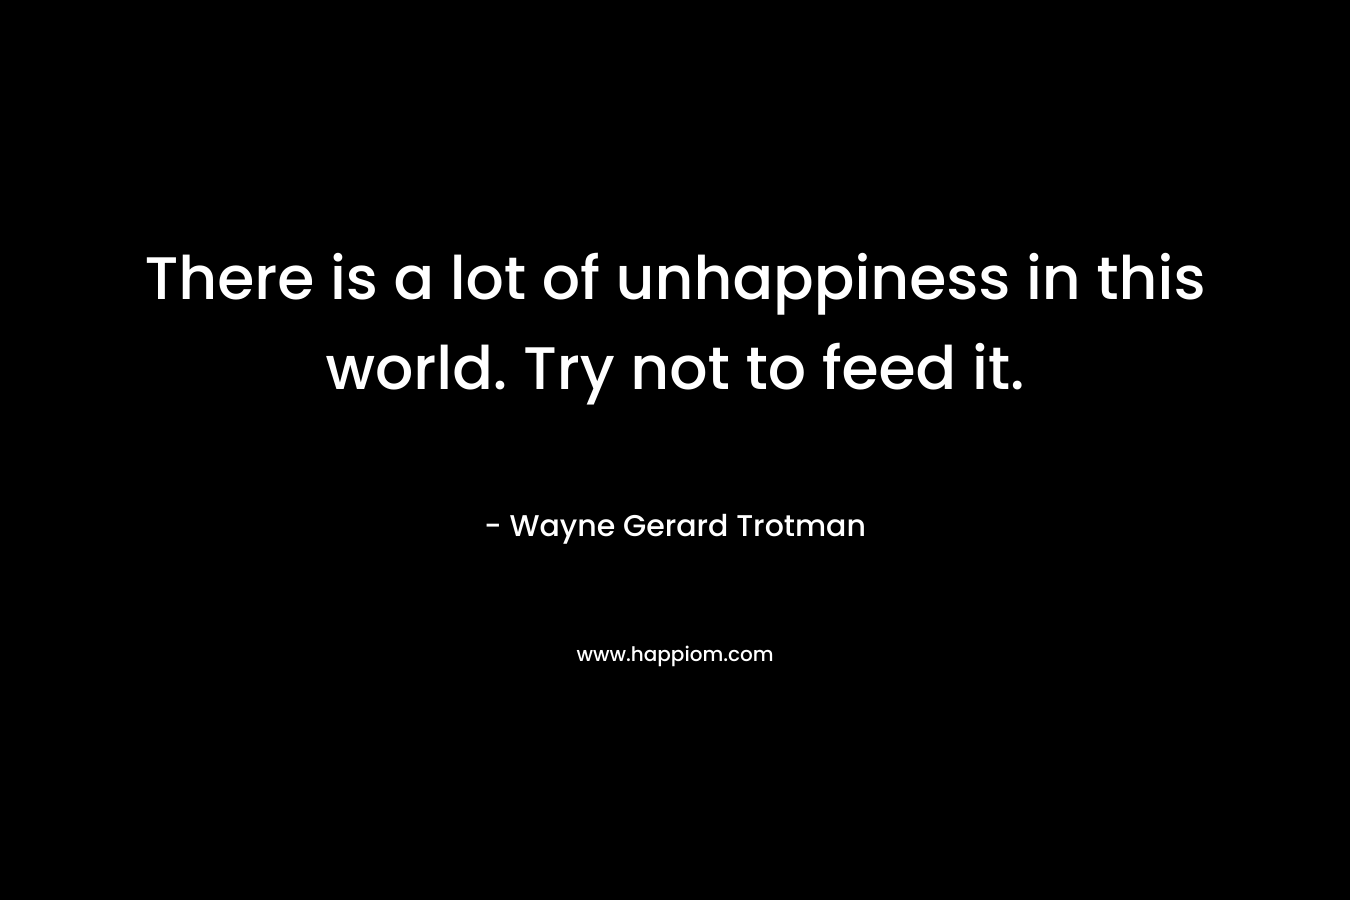 There is a lot of unhappiness in this world. Try not to feed it.